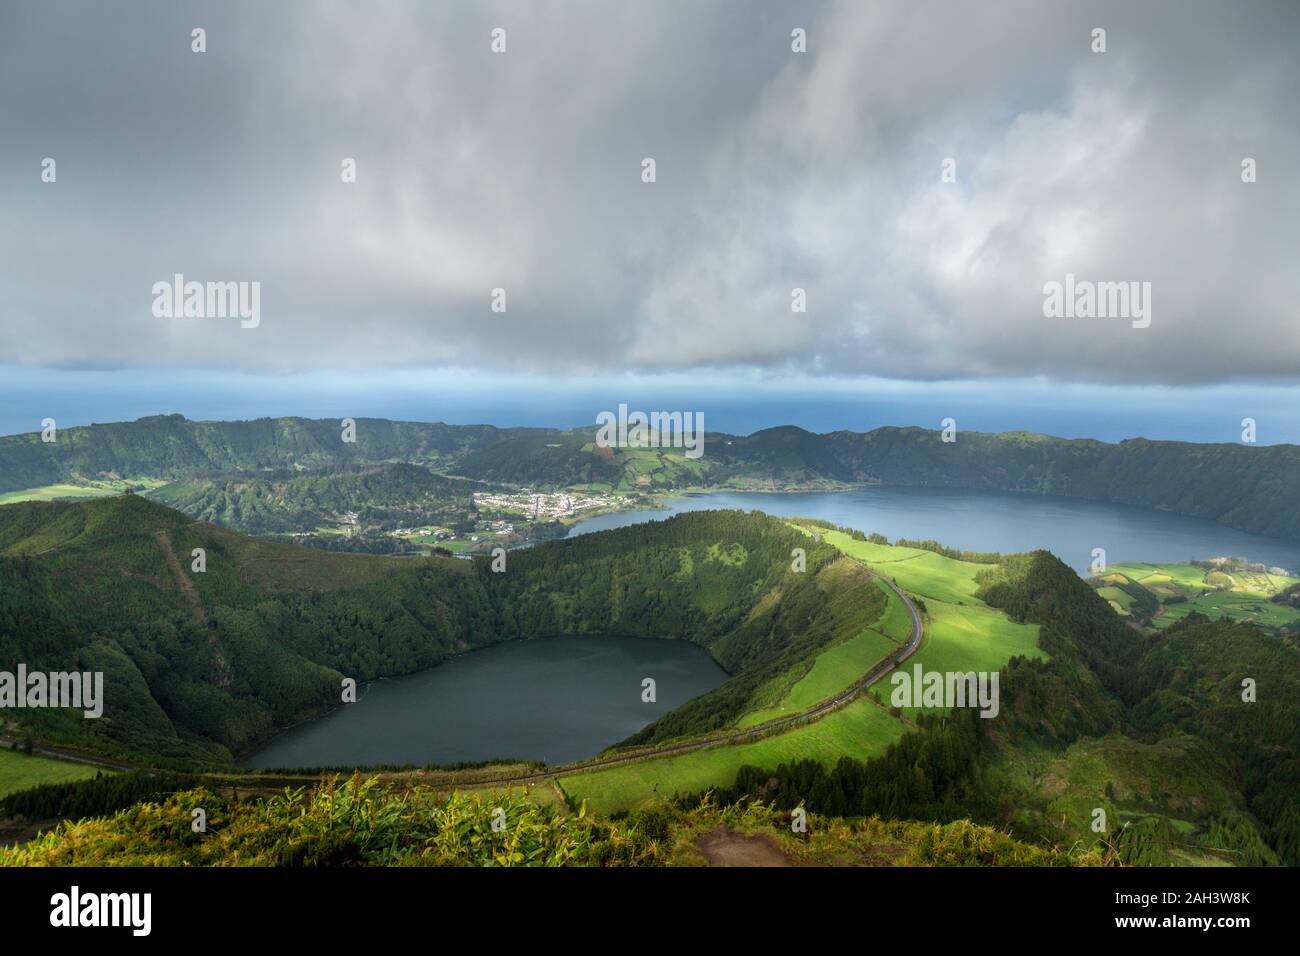 Looking down on Sete Cidades with Lagoa do Canario and Lagoa Rasa on the island of sao Miguel in the Azores. Stock Photo